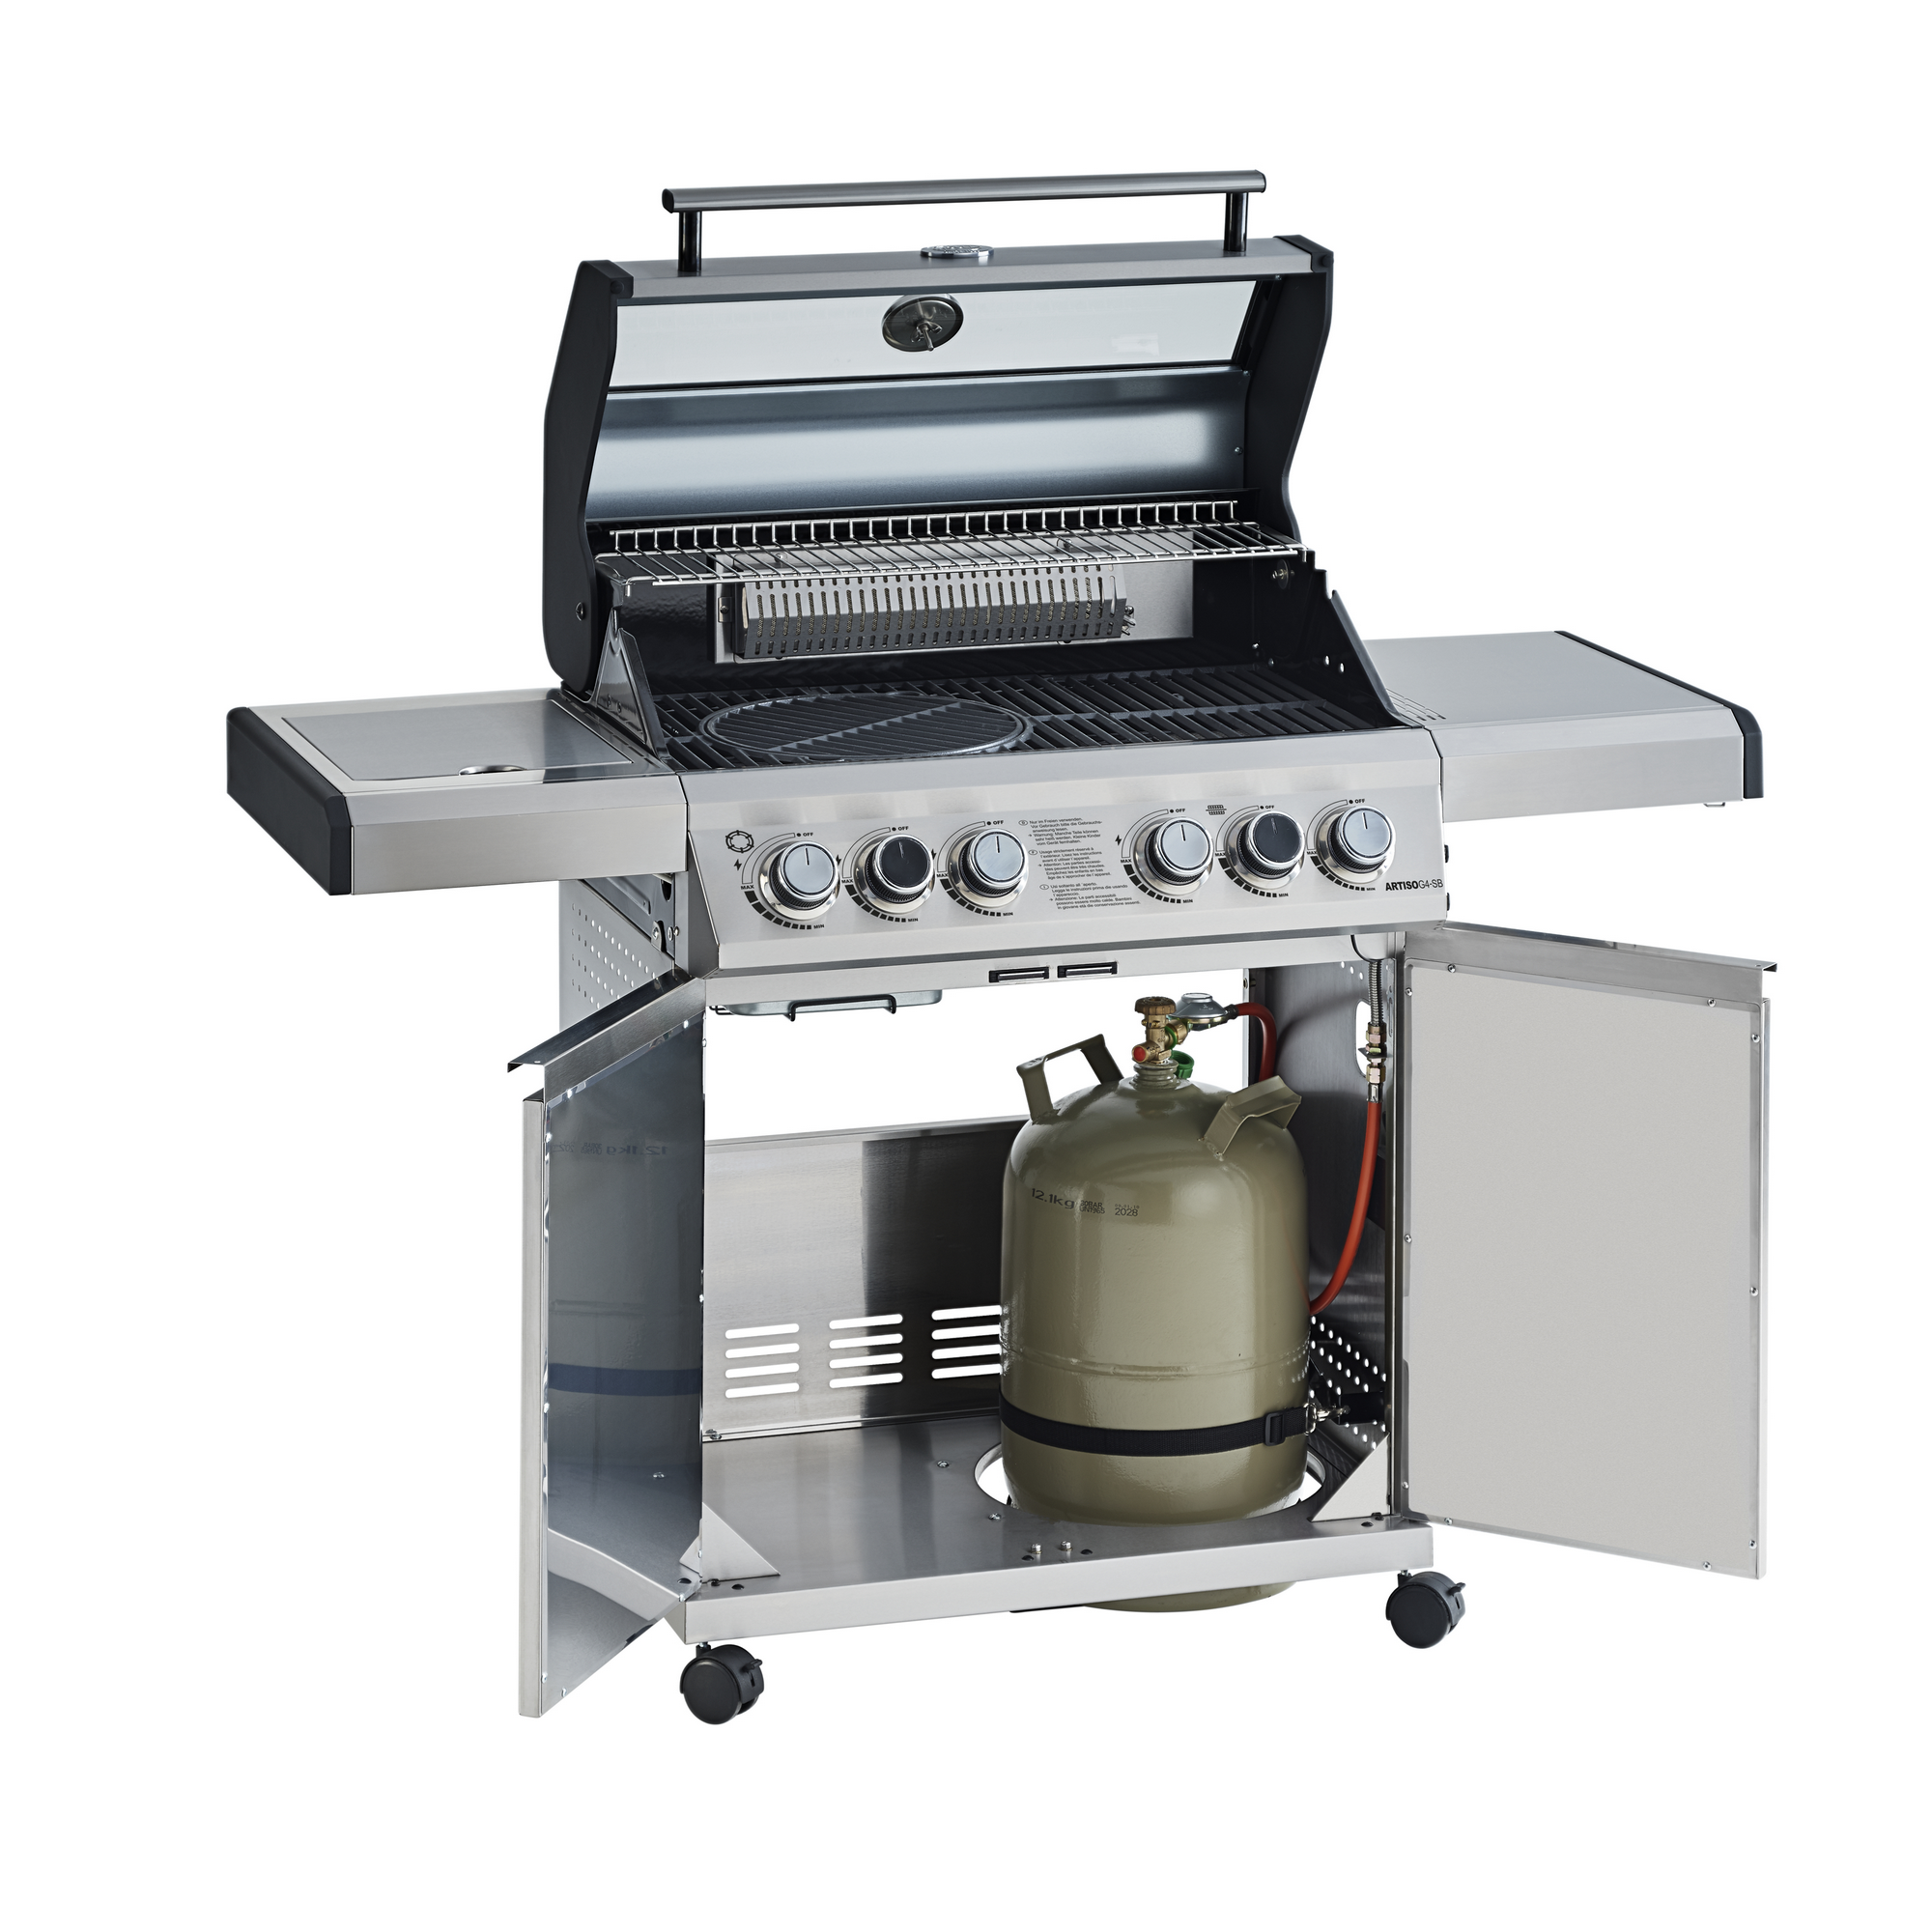 BBQ-Station 'Artiso G4-SB' Edelstahl + product picture